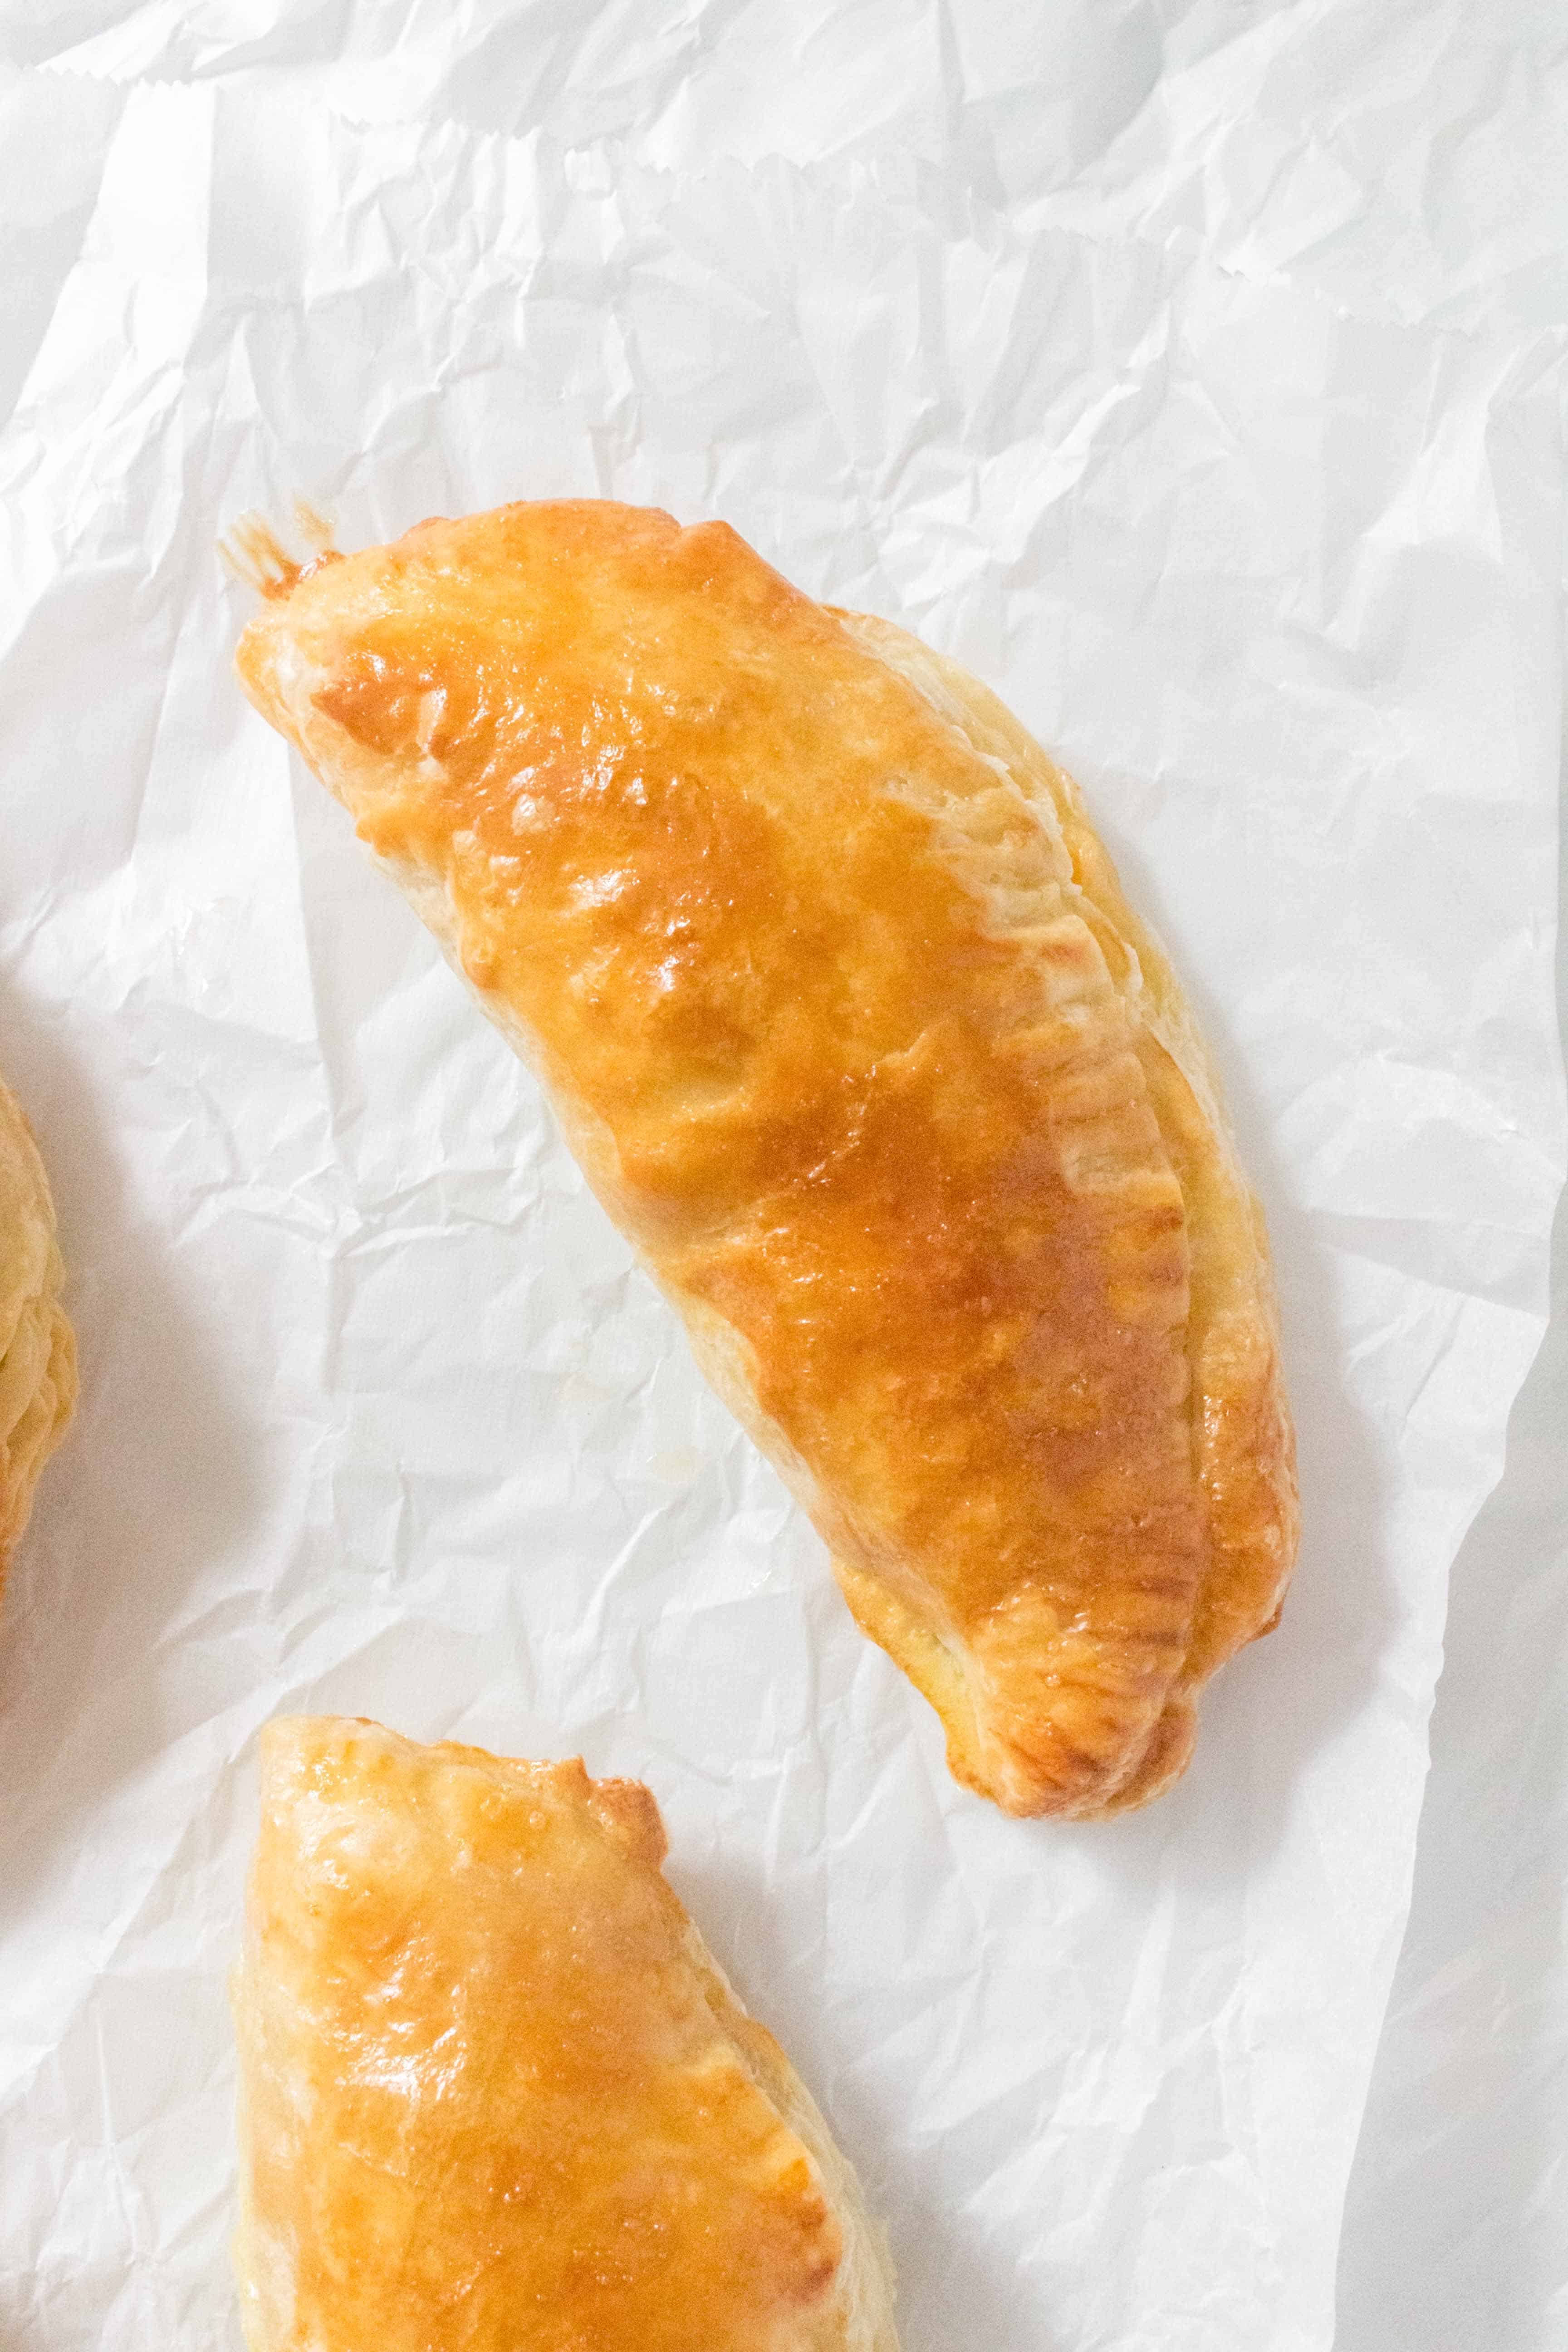 These Leftover Turkey Hand Pies are an easy way to repurpose your leftover turkey! These Leftover Turkey Hand Pies makes for a great snack and freezes well!